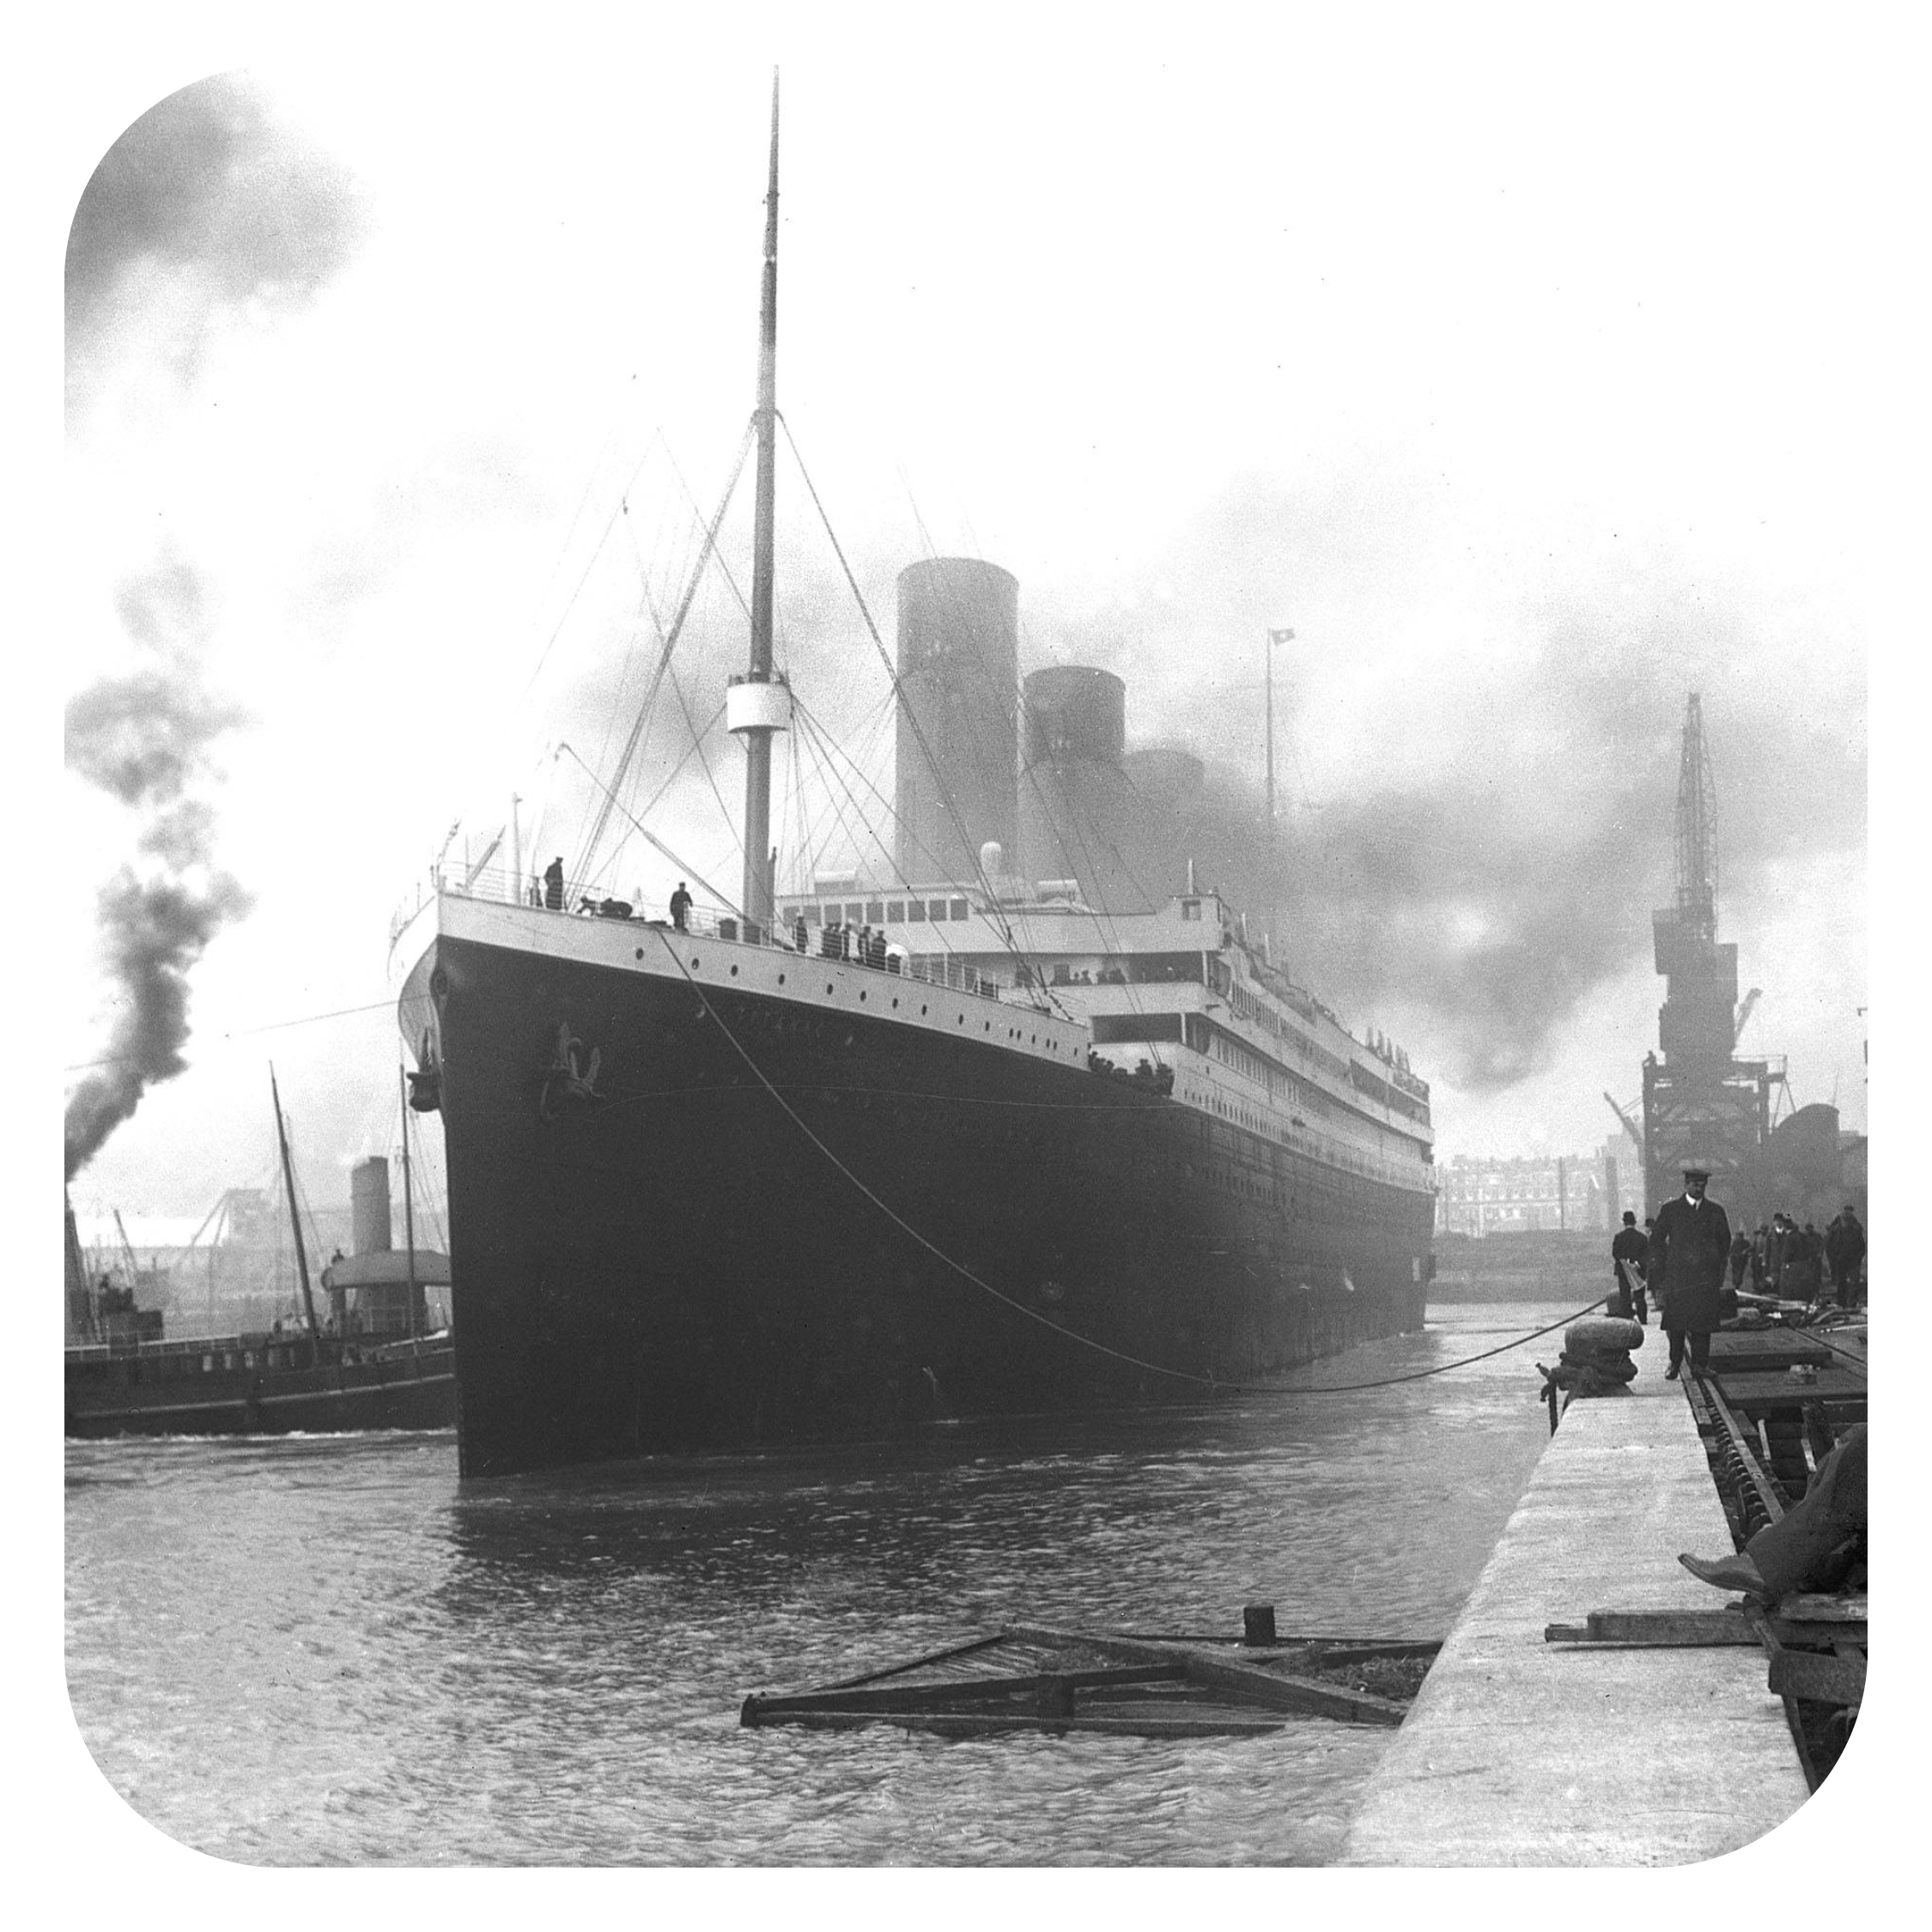 12:15 a.m. – Titanic begins its maiden voyage from Southampton, England.